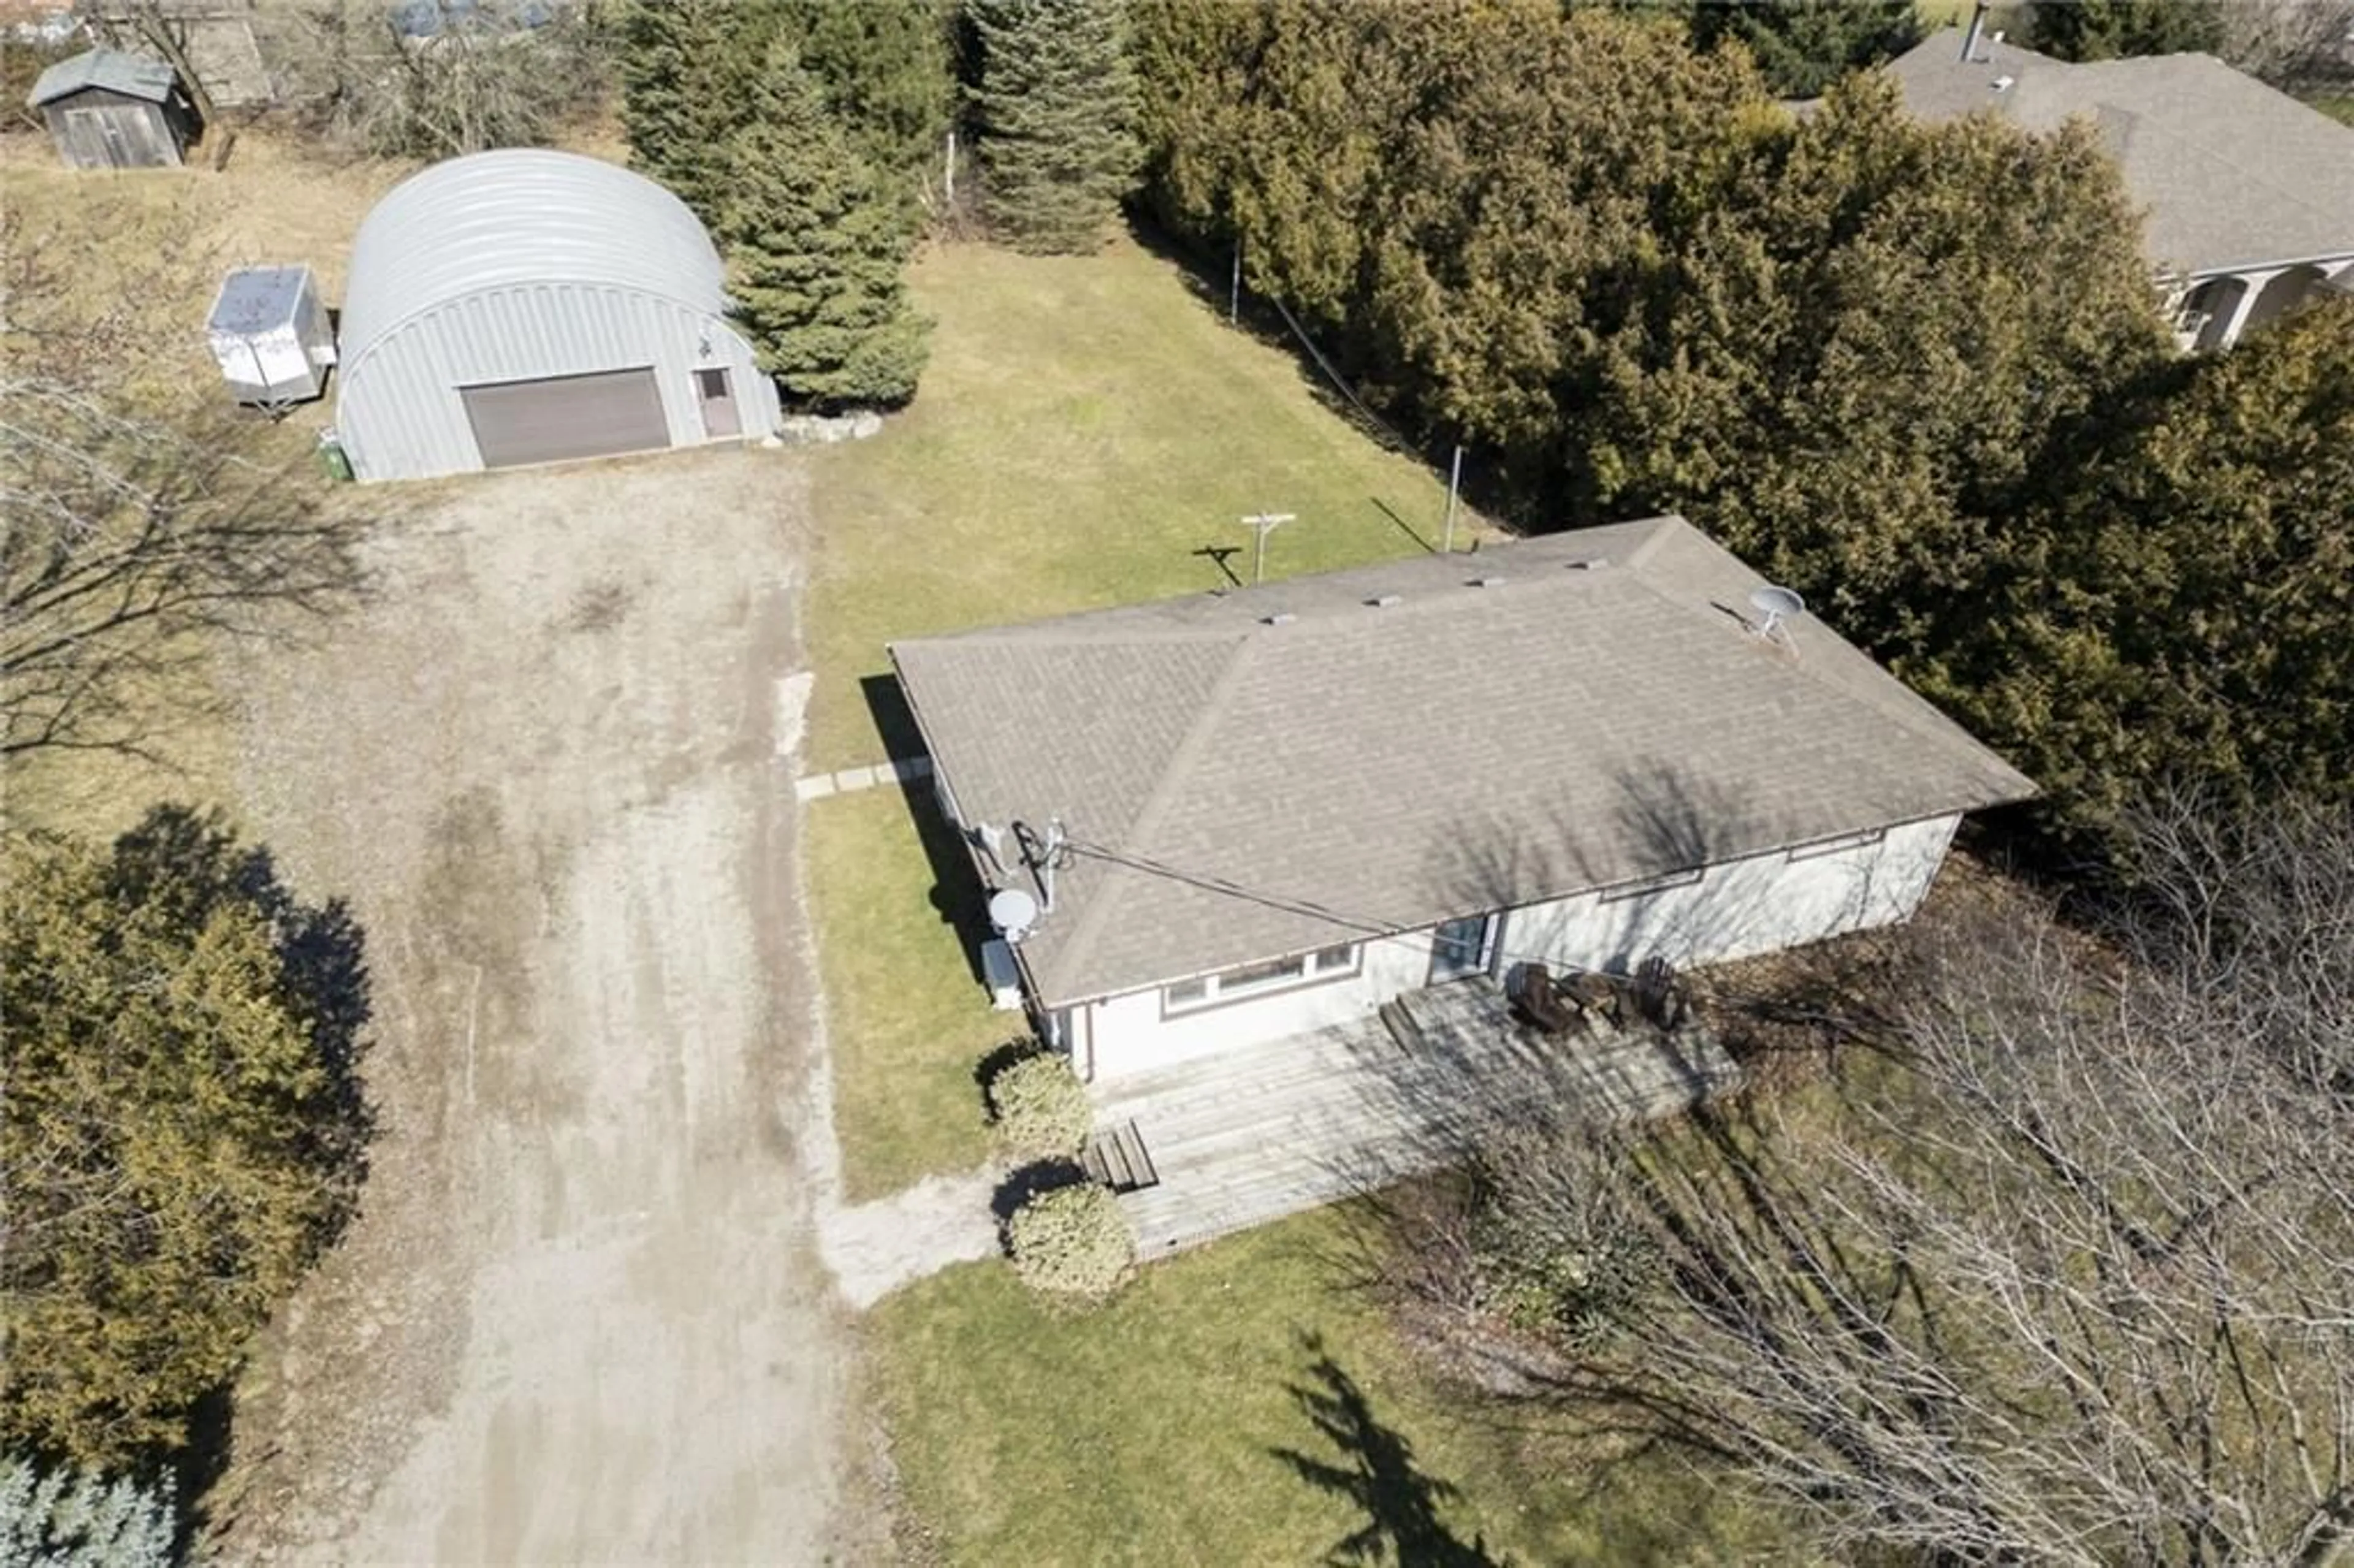 Frontside or backside of a home for 1855 CONCESSION 8 Rd, Cambridge Ontario N1R 5S2